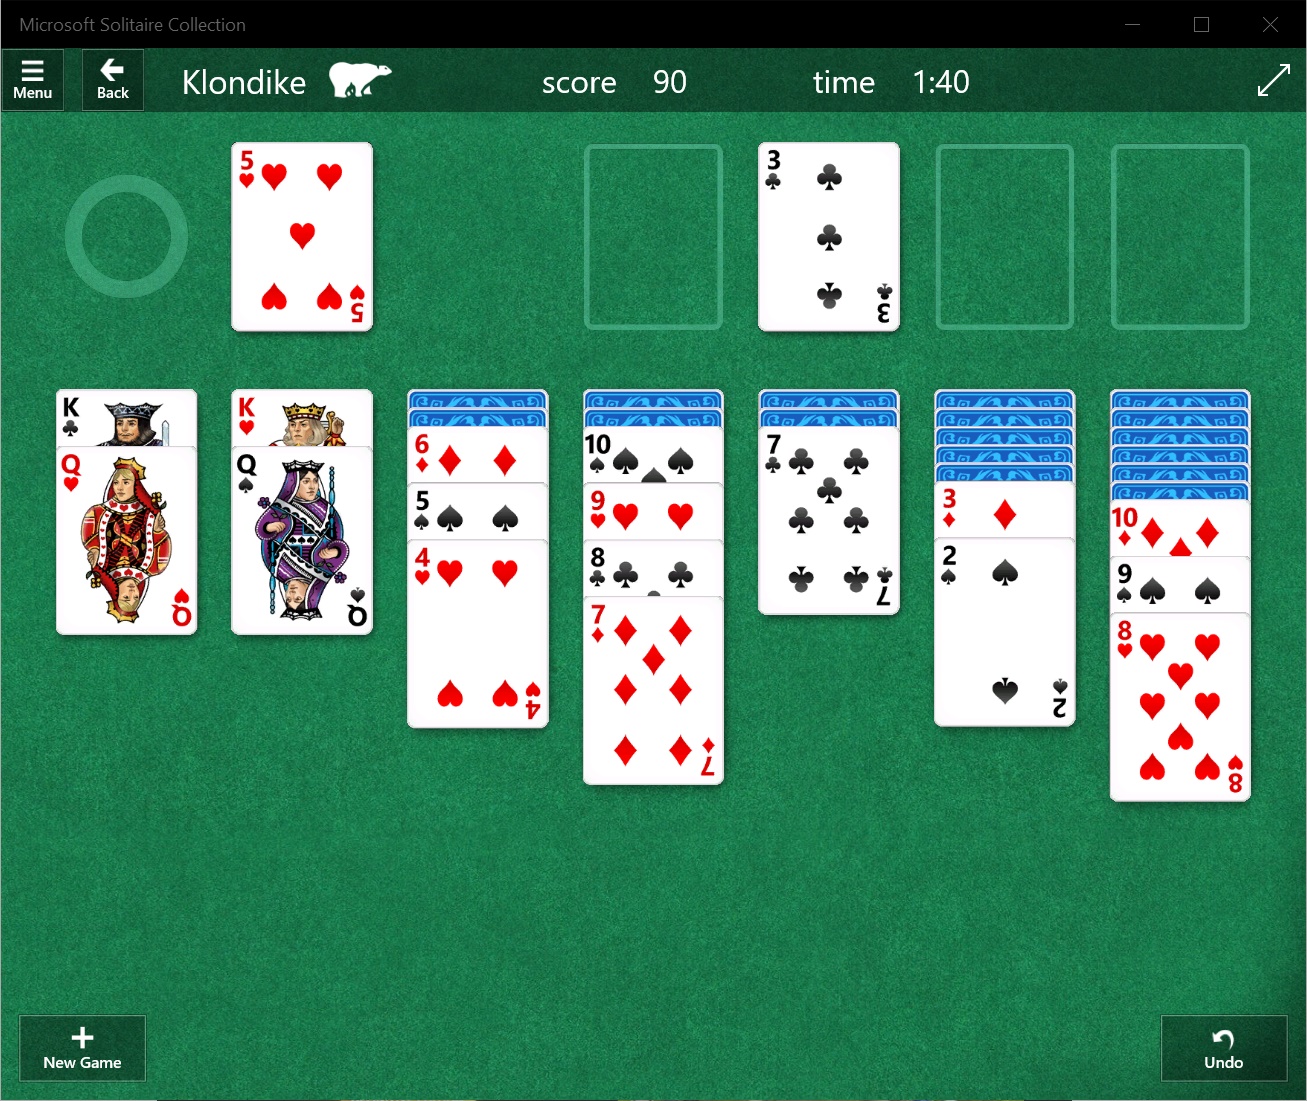 microsoft solitaire collection not working 2022